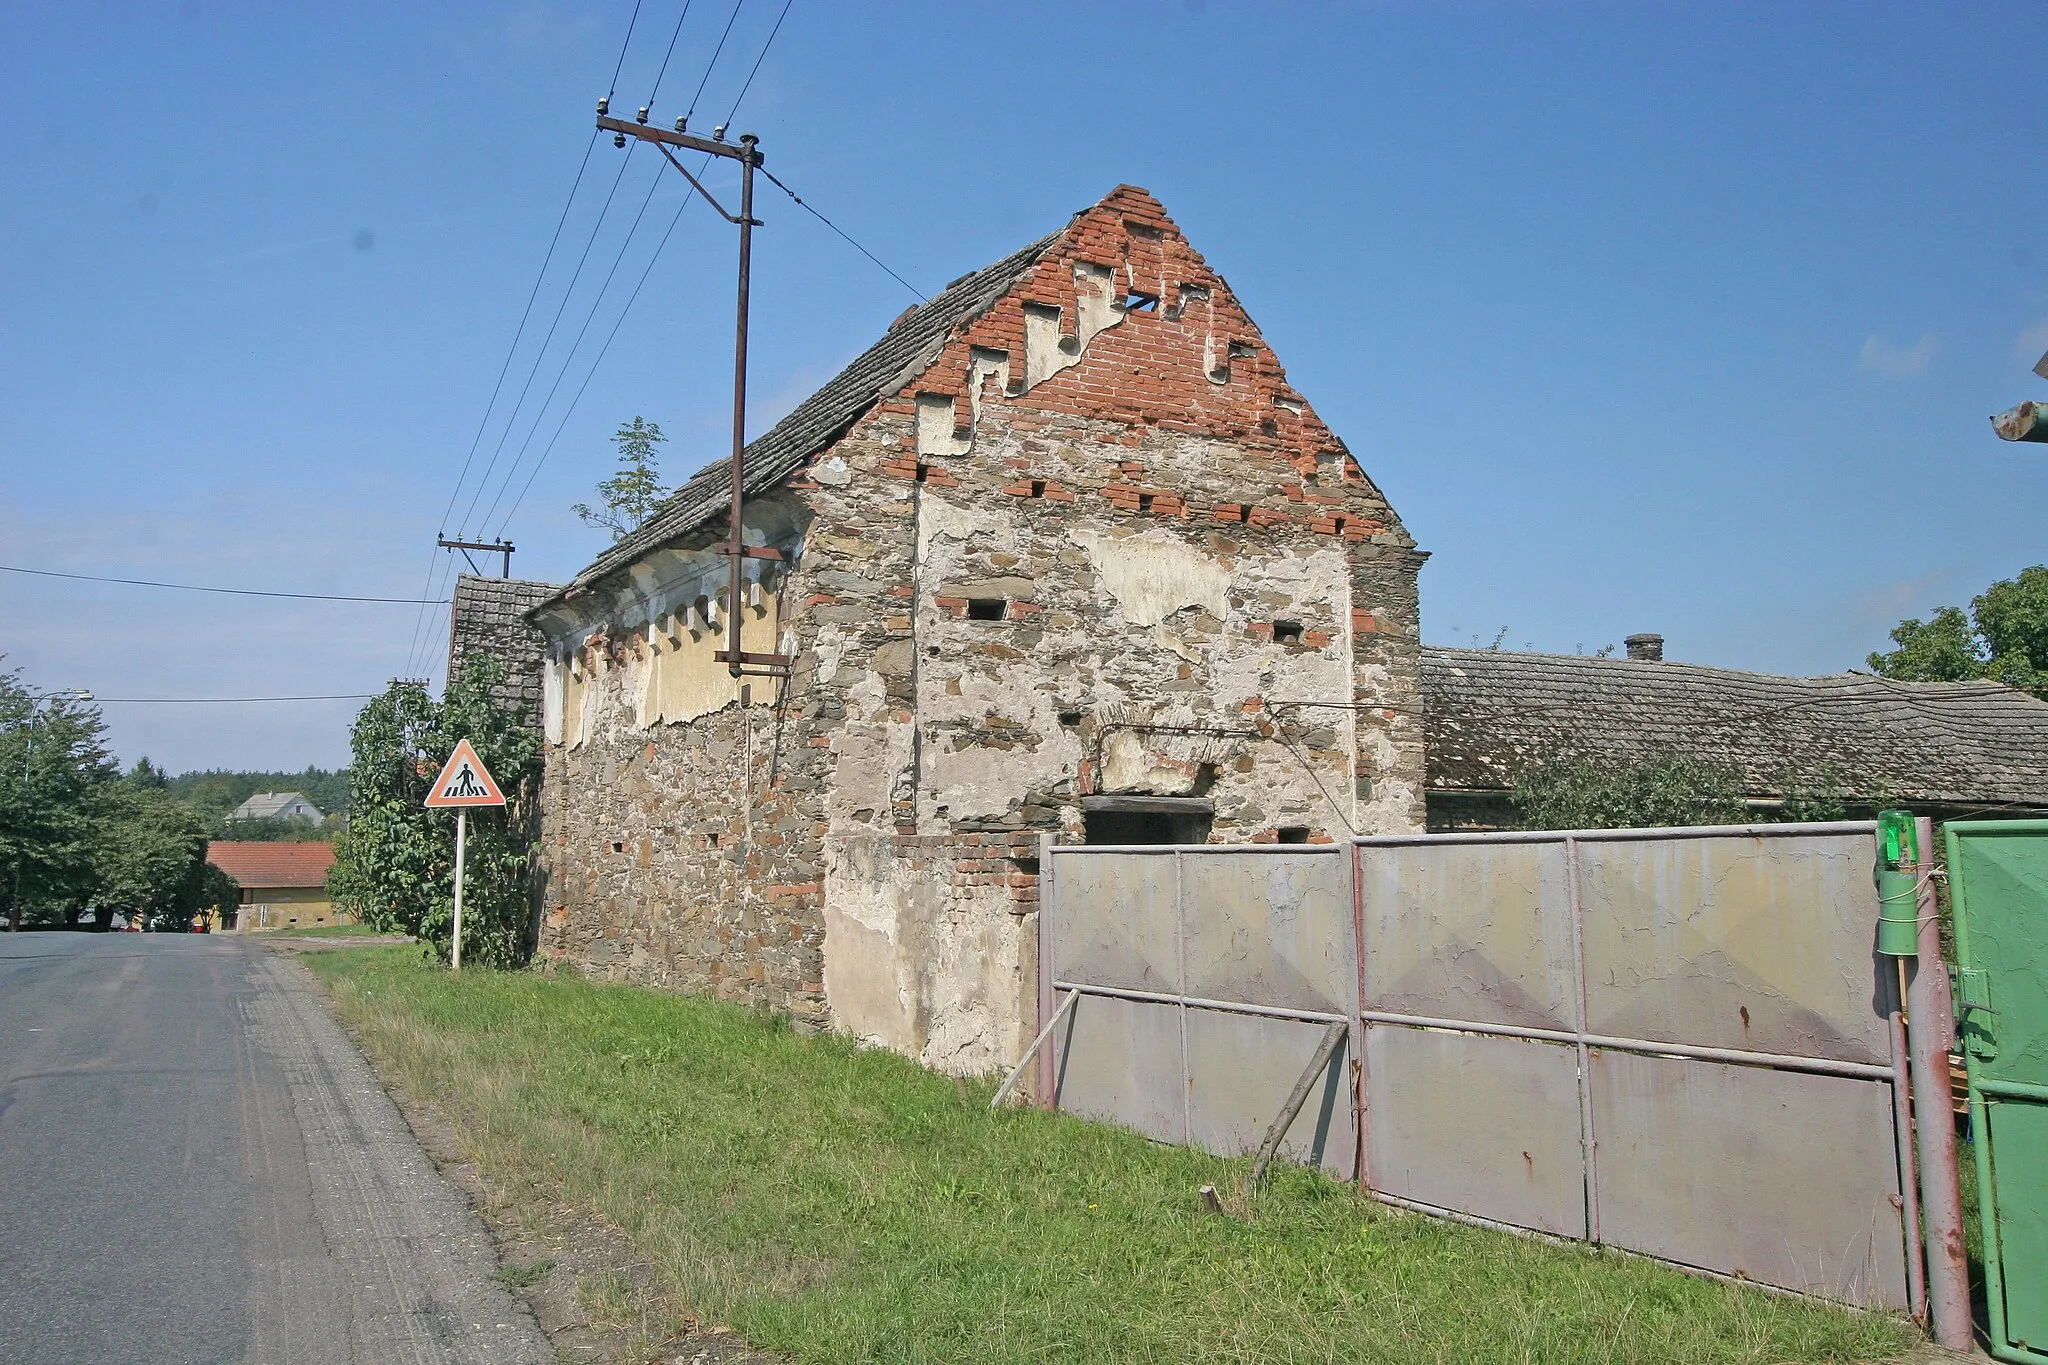 Photo showing: Kojice čp. 10
Camera location 50° 02′ 35.92″ N, 15° 23′ 13.77″ E View this and other nearby images on: OpenStreetMap 50.043311;   15.387157

This file was created as a part of the photographic program of Wikimedia Czech Republic. Project: Foto českých obcí The program supports Wikimedia Commons photographers in the Czech Republic.